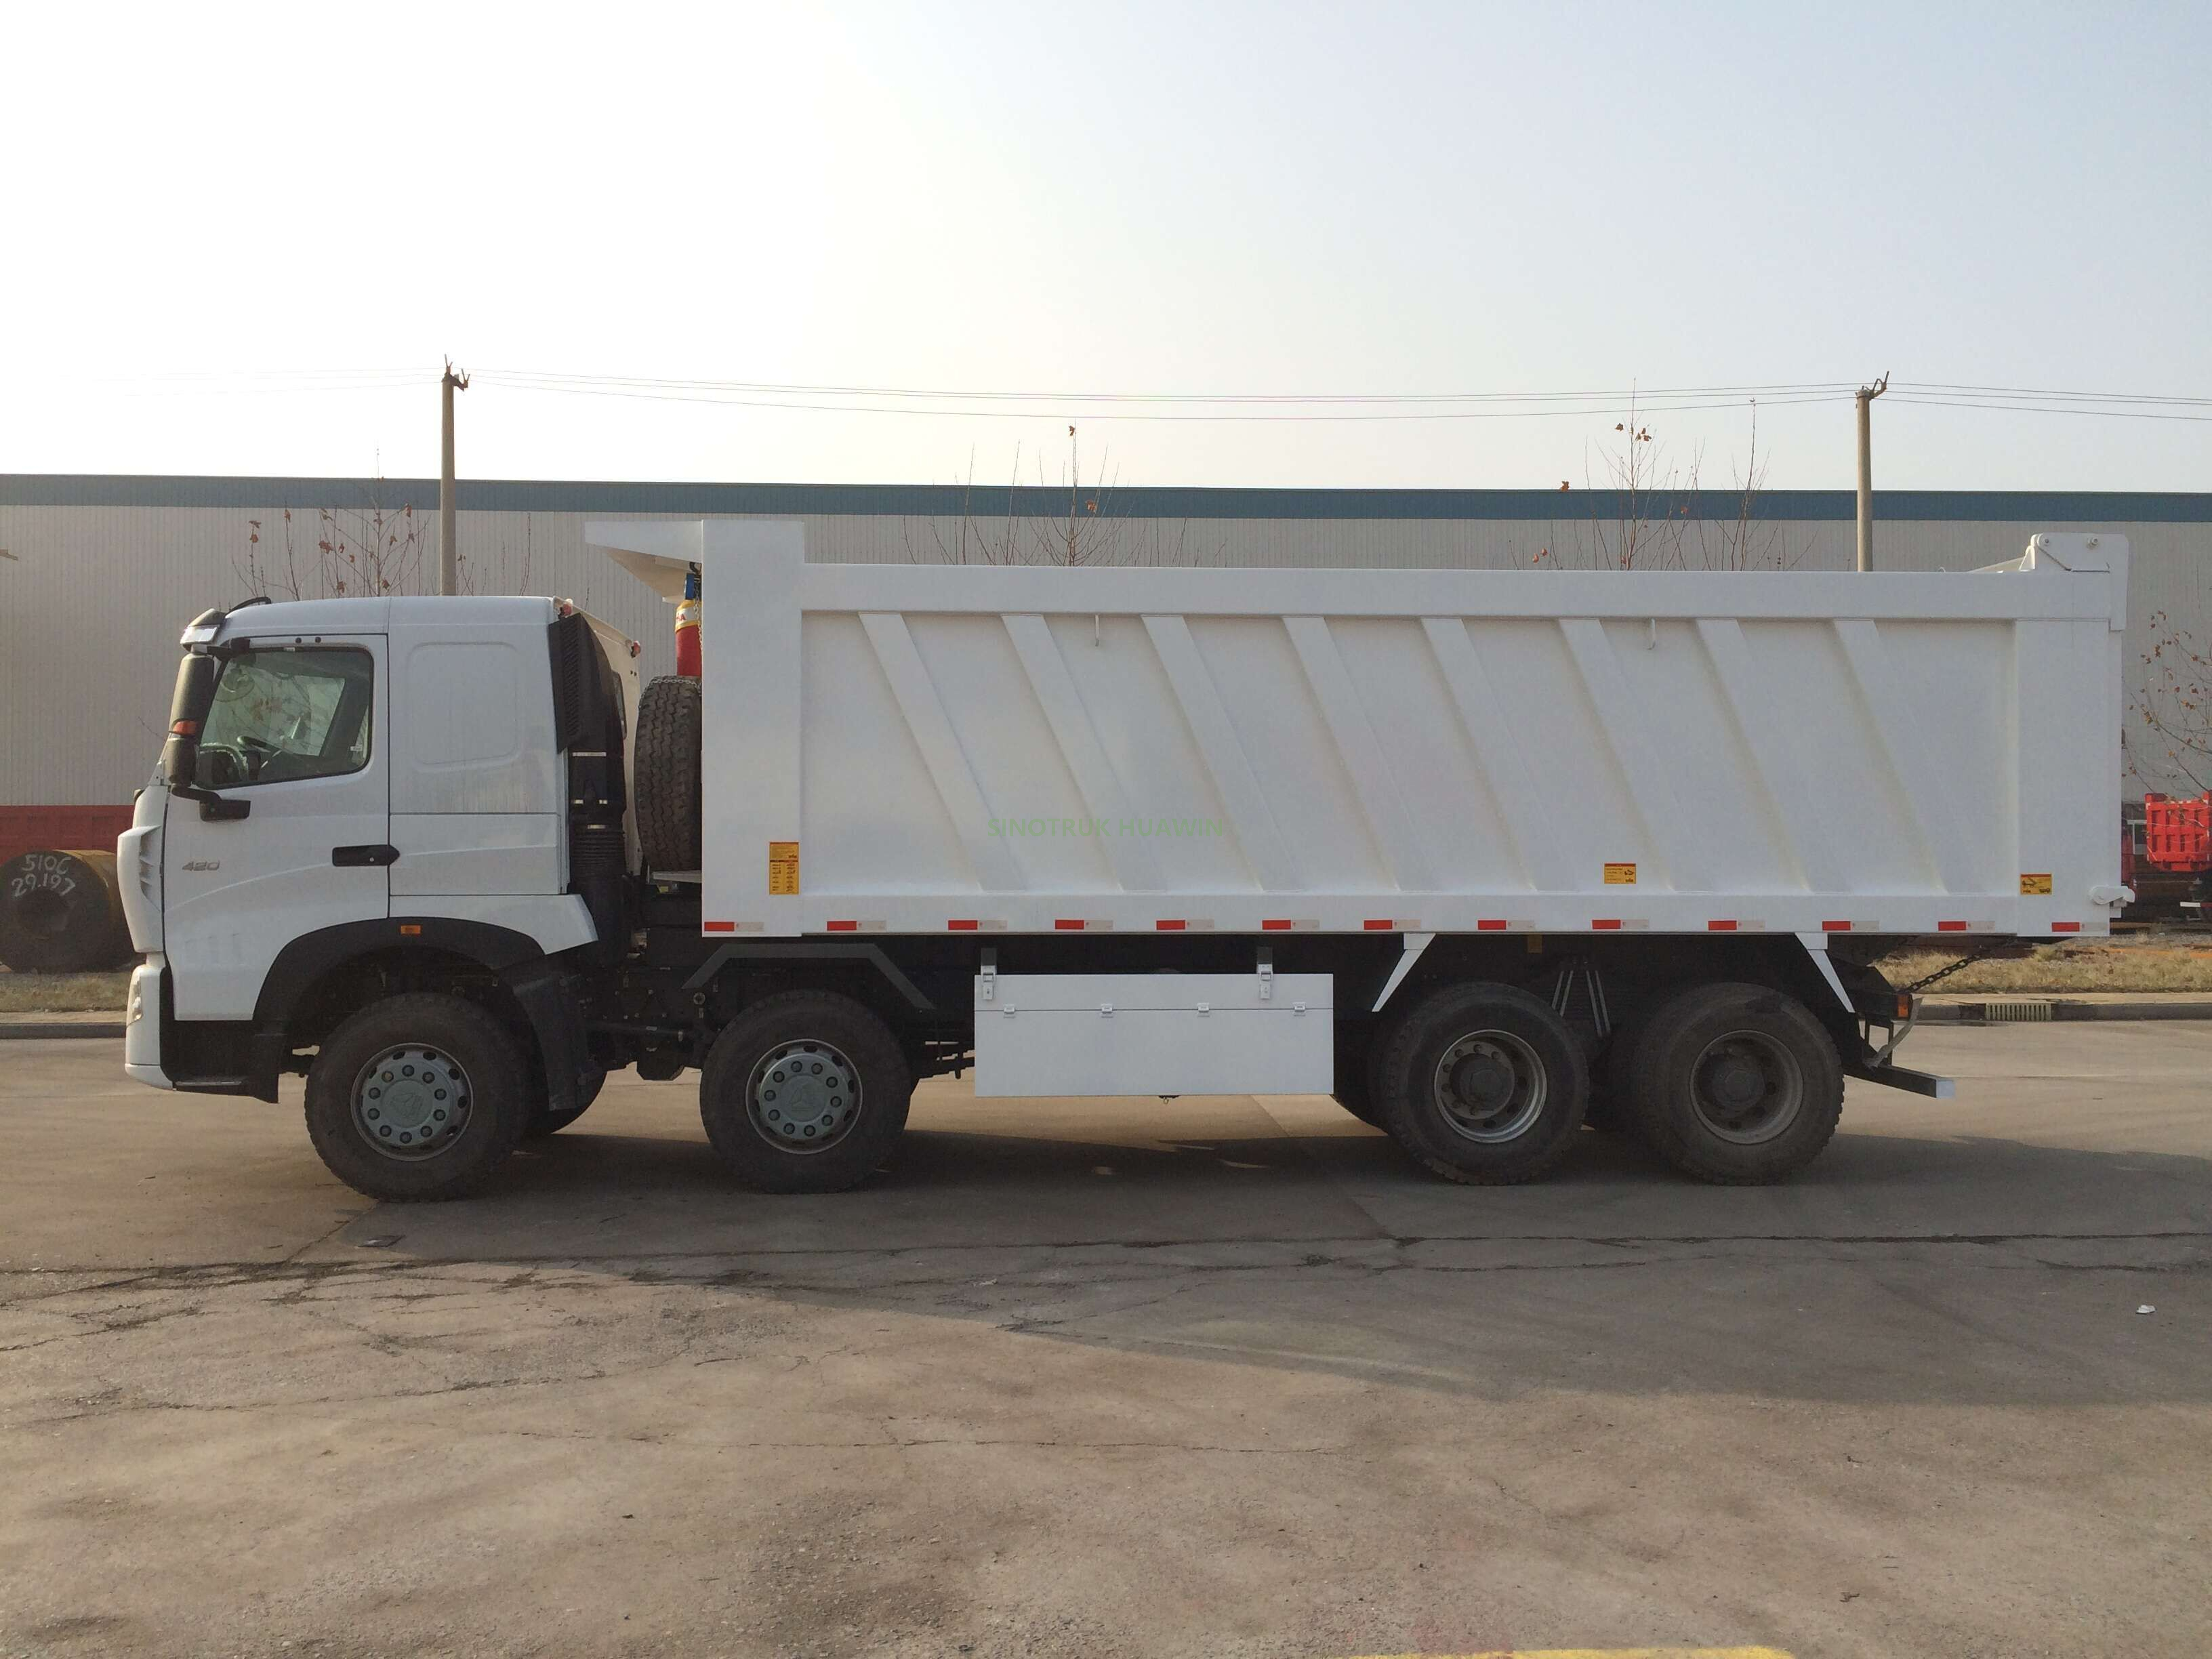 SINOTRUK A7 8X4 Front Tipping Dump Truck for Africa